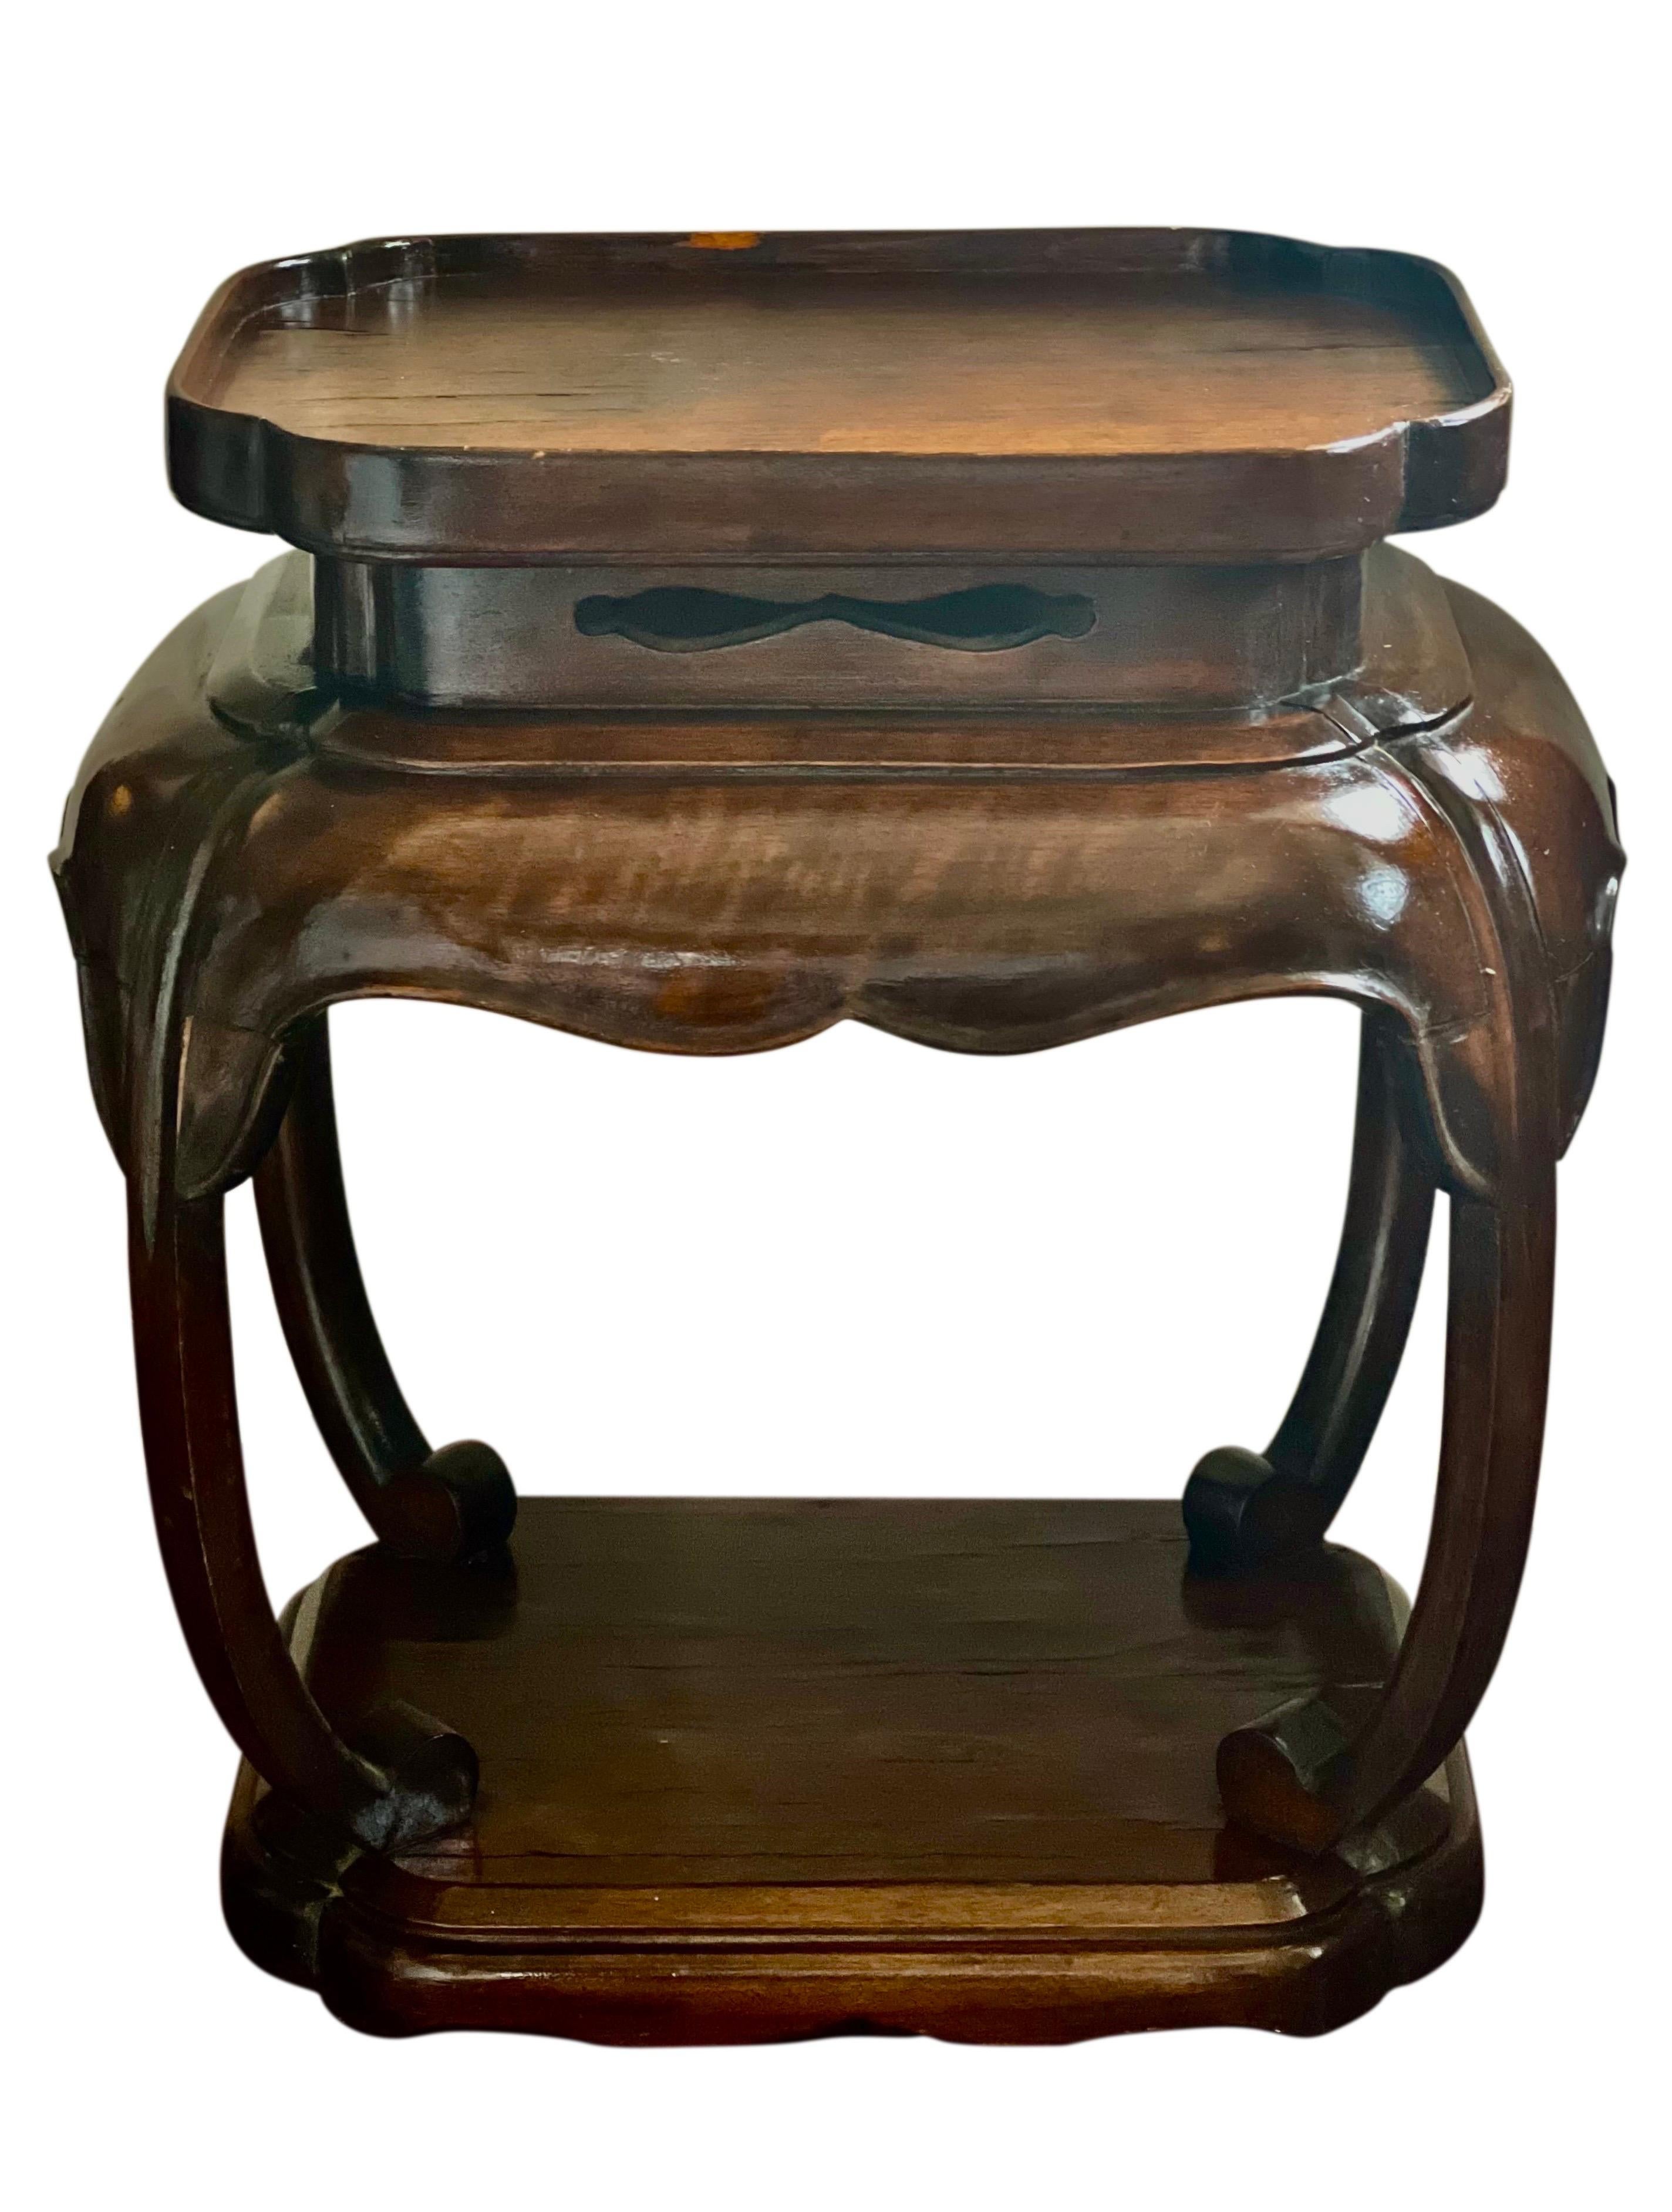 Lacquered Italian Asian Inspired Mahogany Low Side Table or Plant Stand For Sale